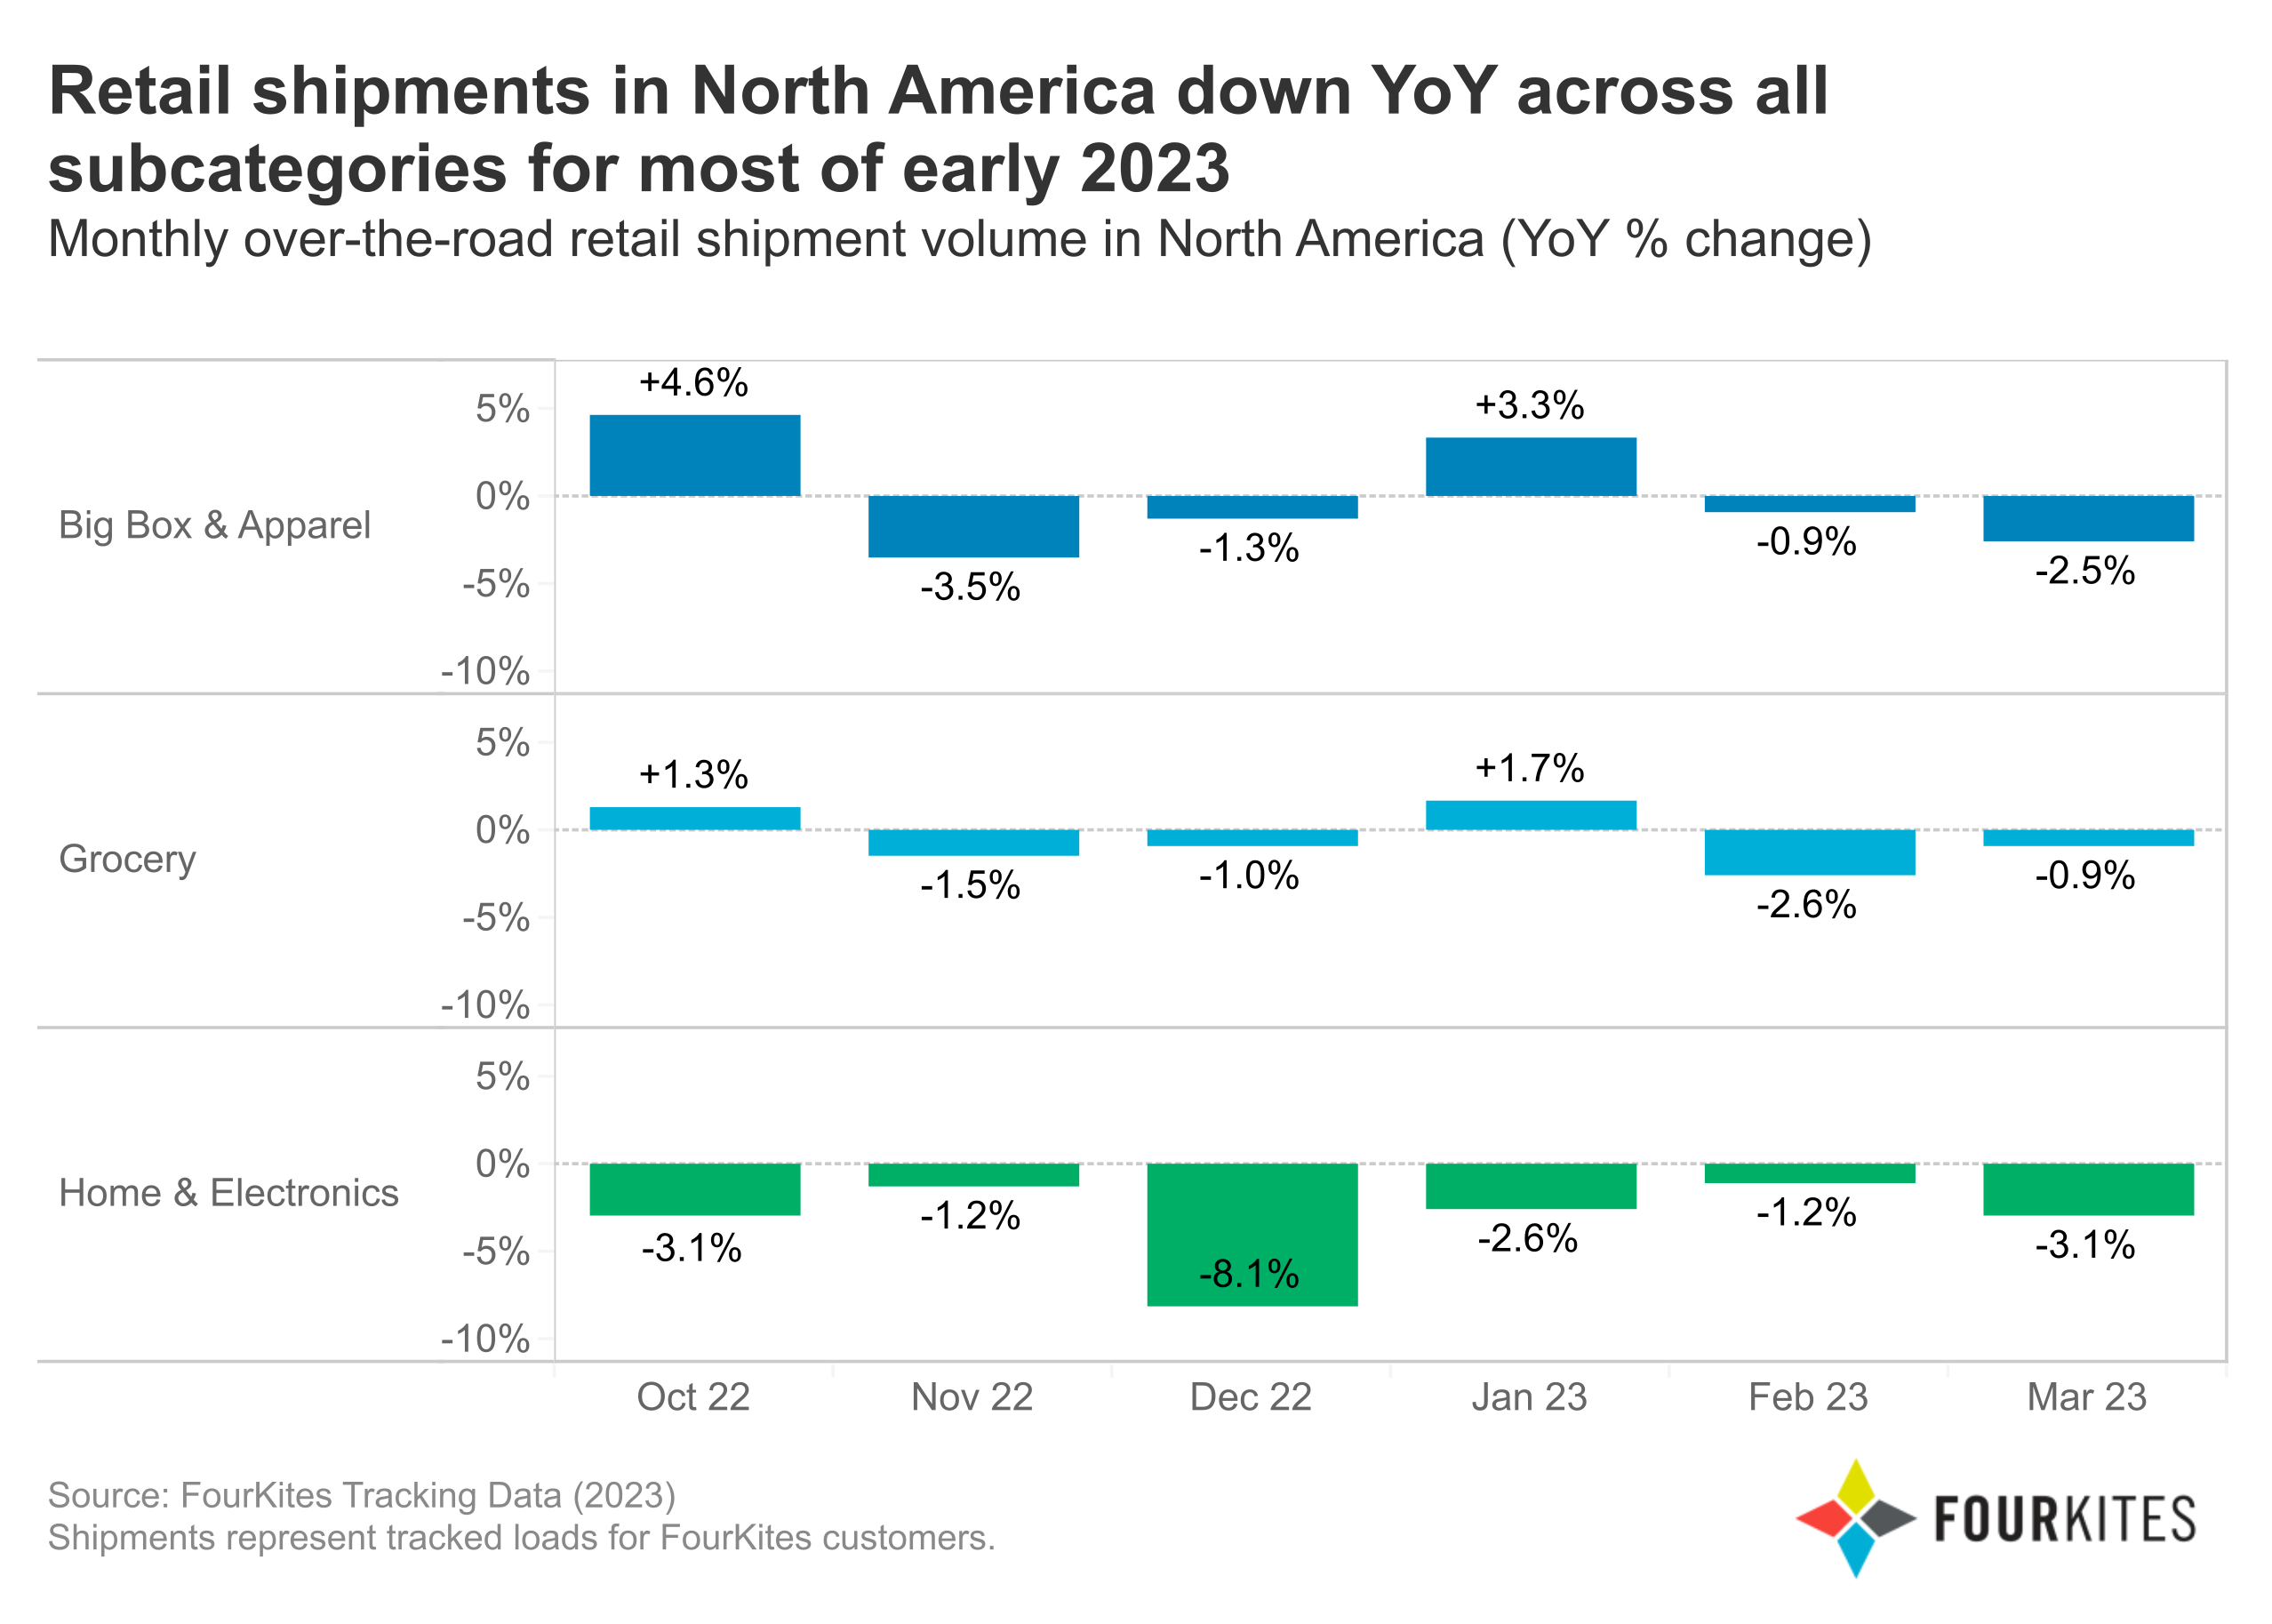 Retail ships in North America down YoY across all subcategories for most of early 2023